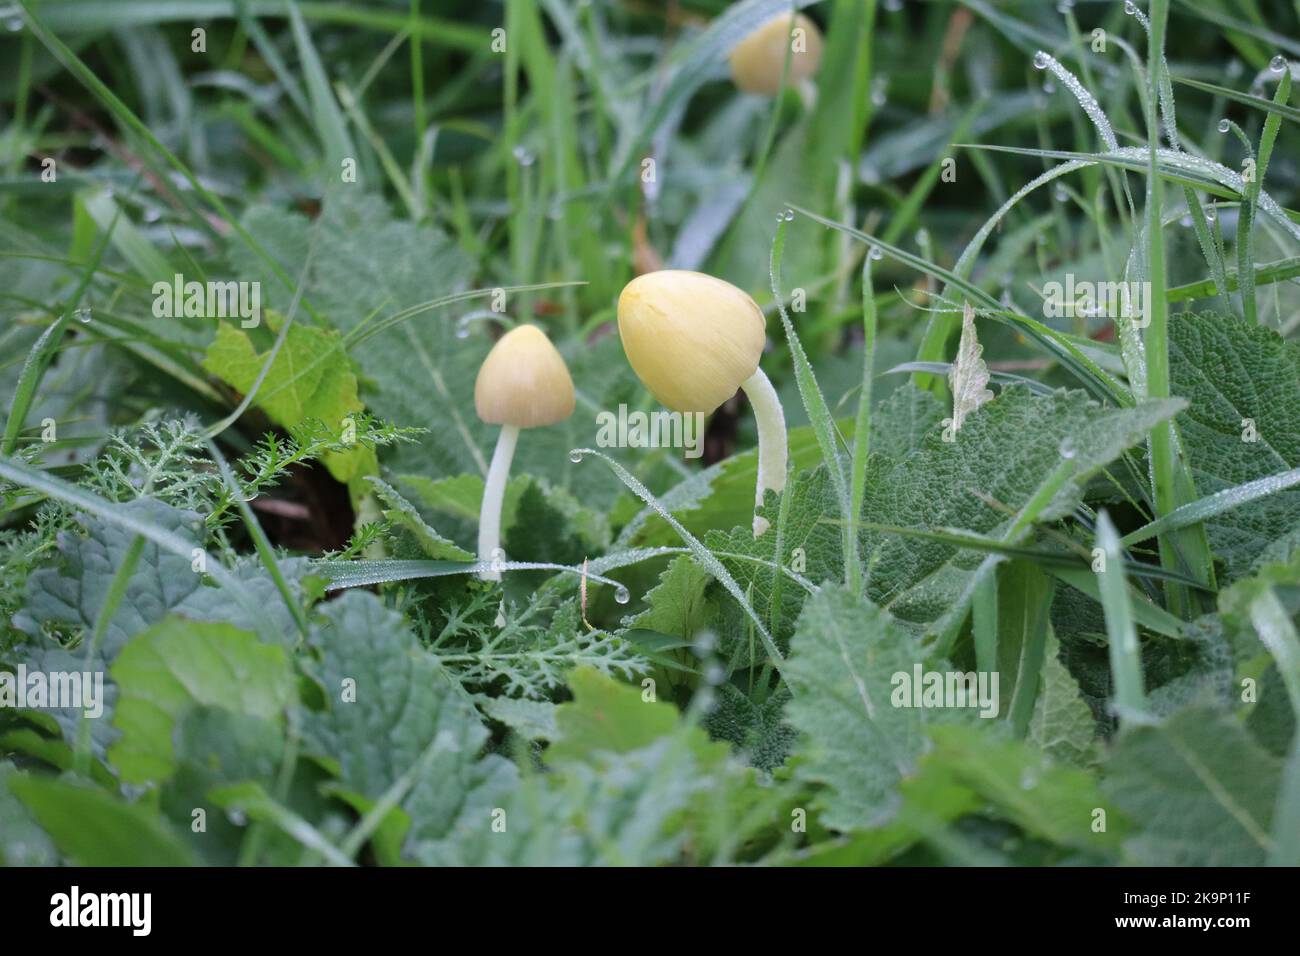 yellow Field-Cap Mushrooms, one of which hangs his Head Stock Photo